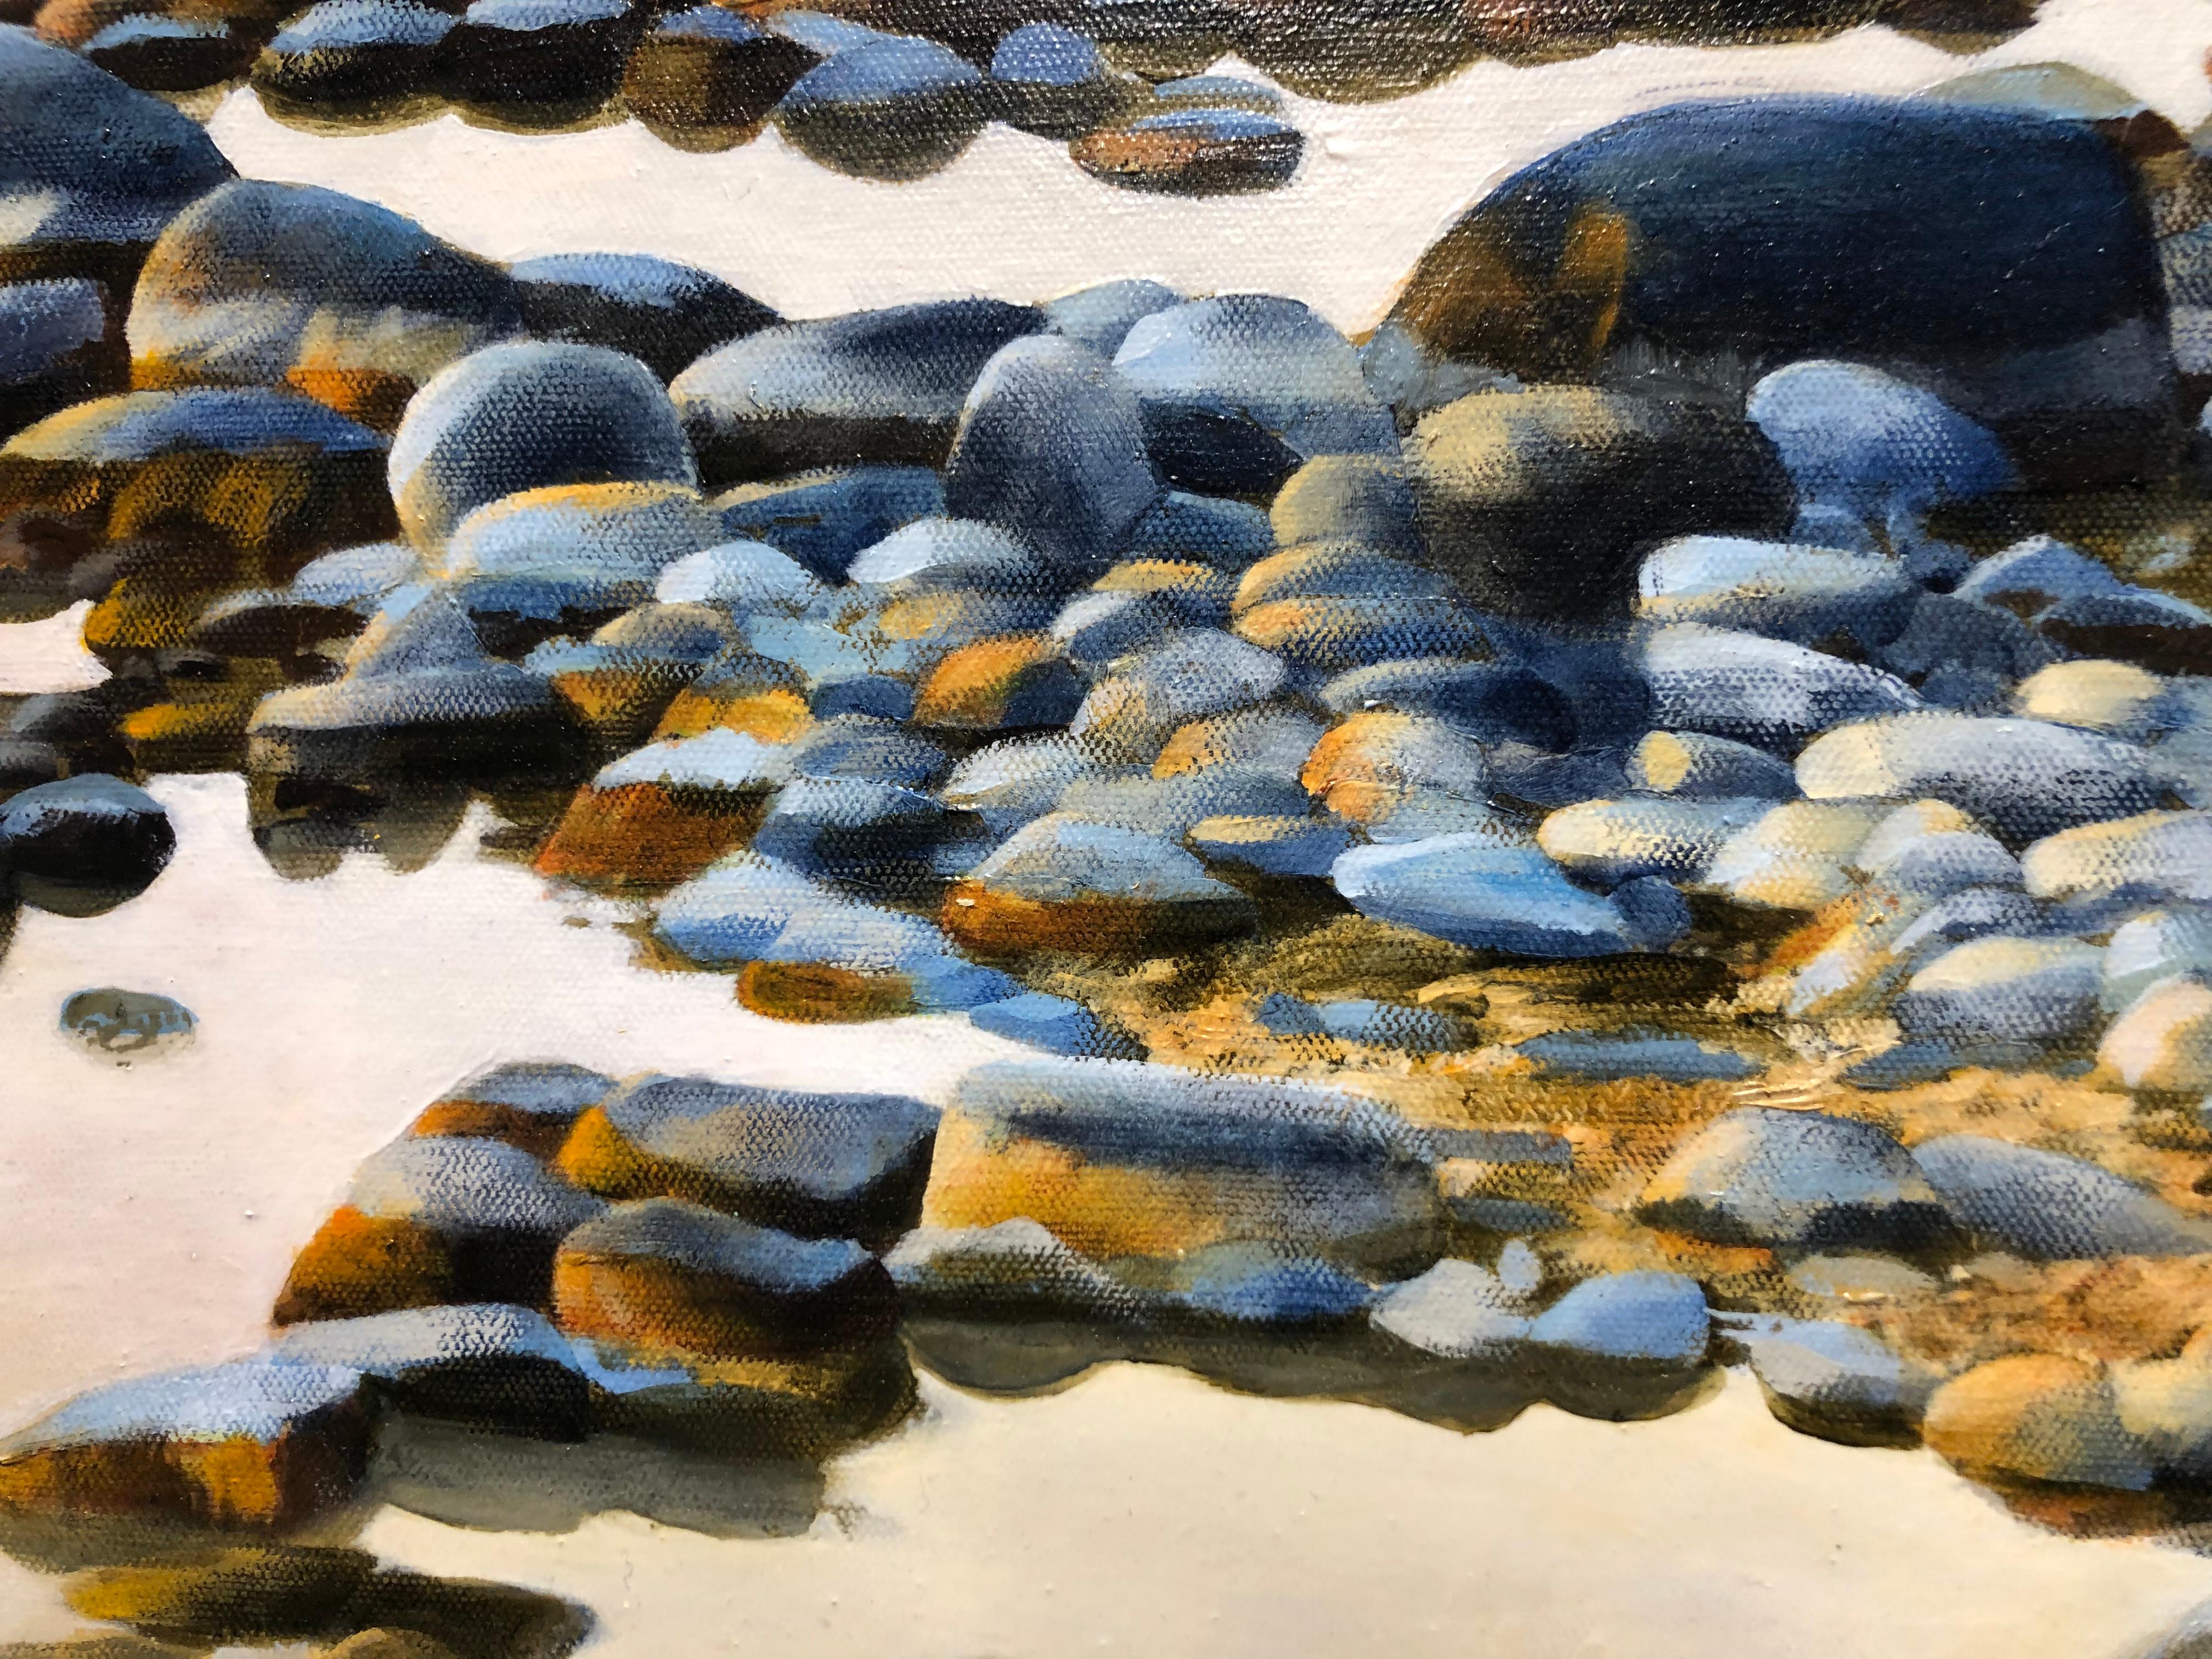 Song of Stones, Rocky Beach of Northern Michigan, Original Oil on Canvas 4